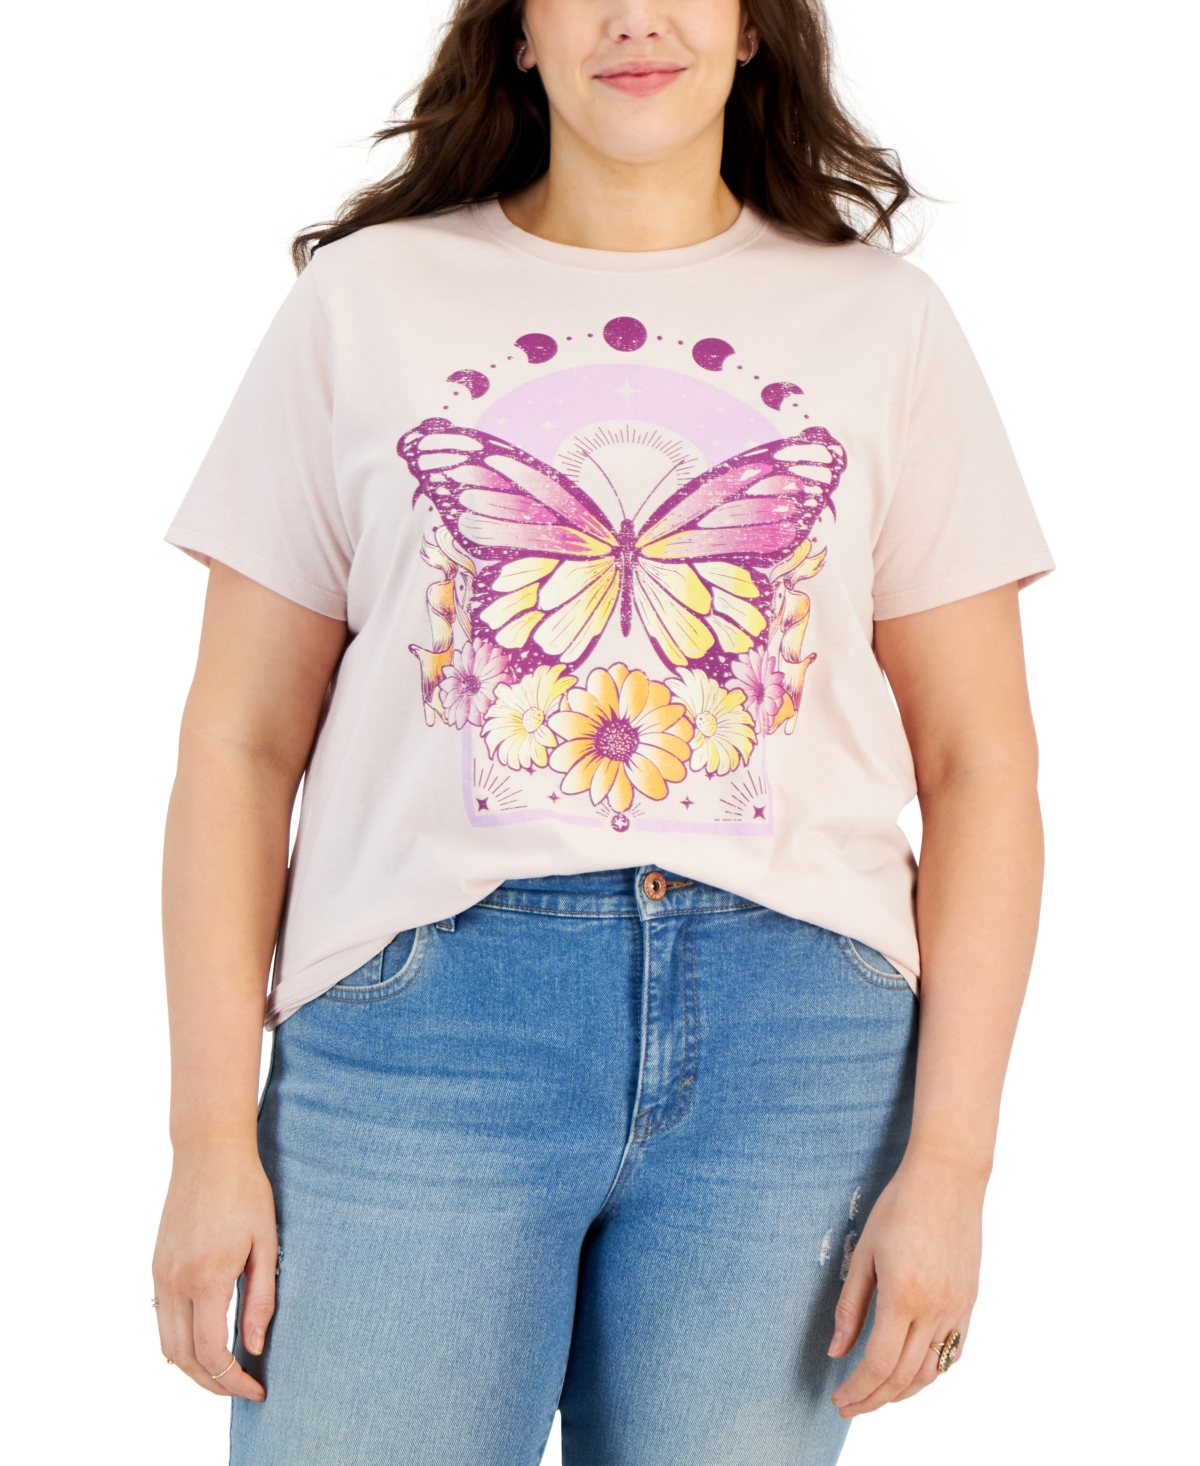 Trendy Plus Size Floral Butterfly T-Shirt - Hushed Violet